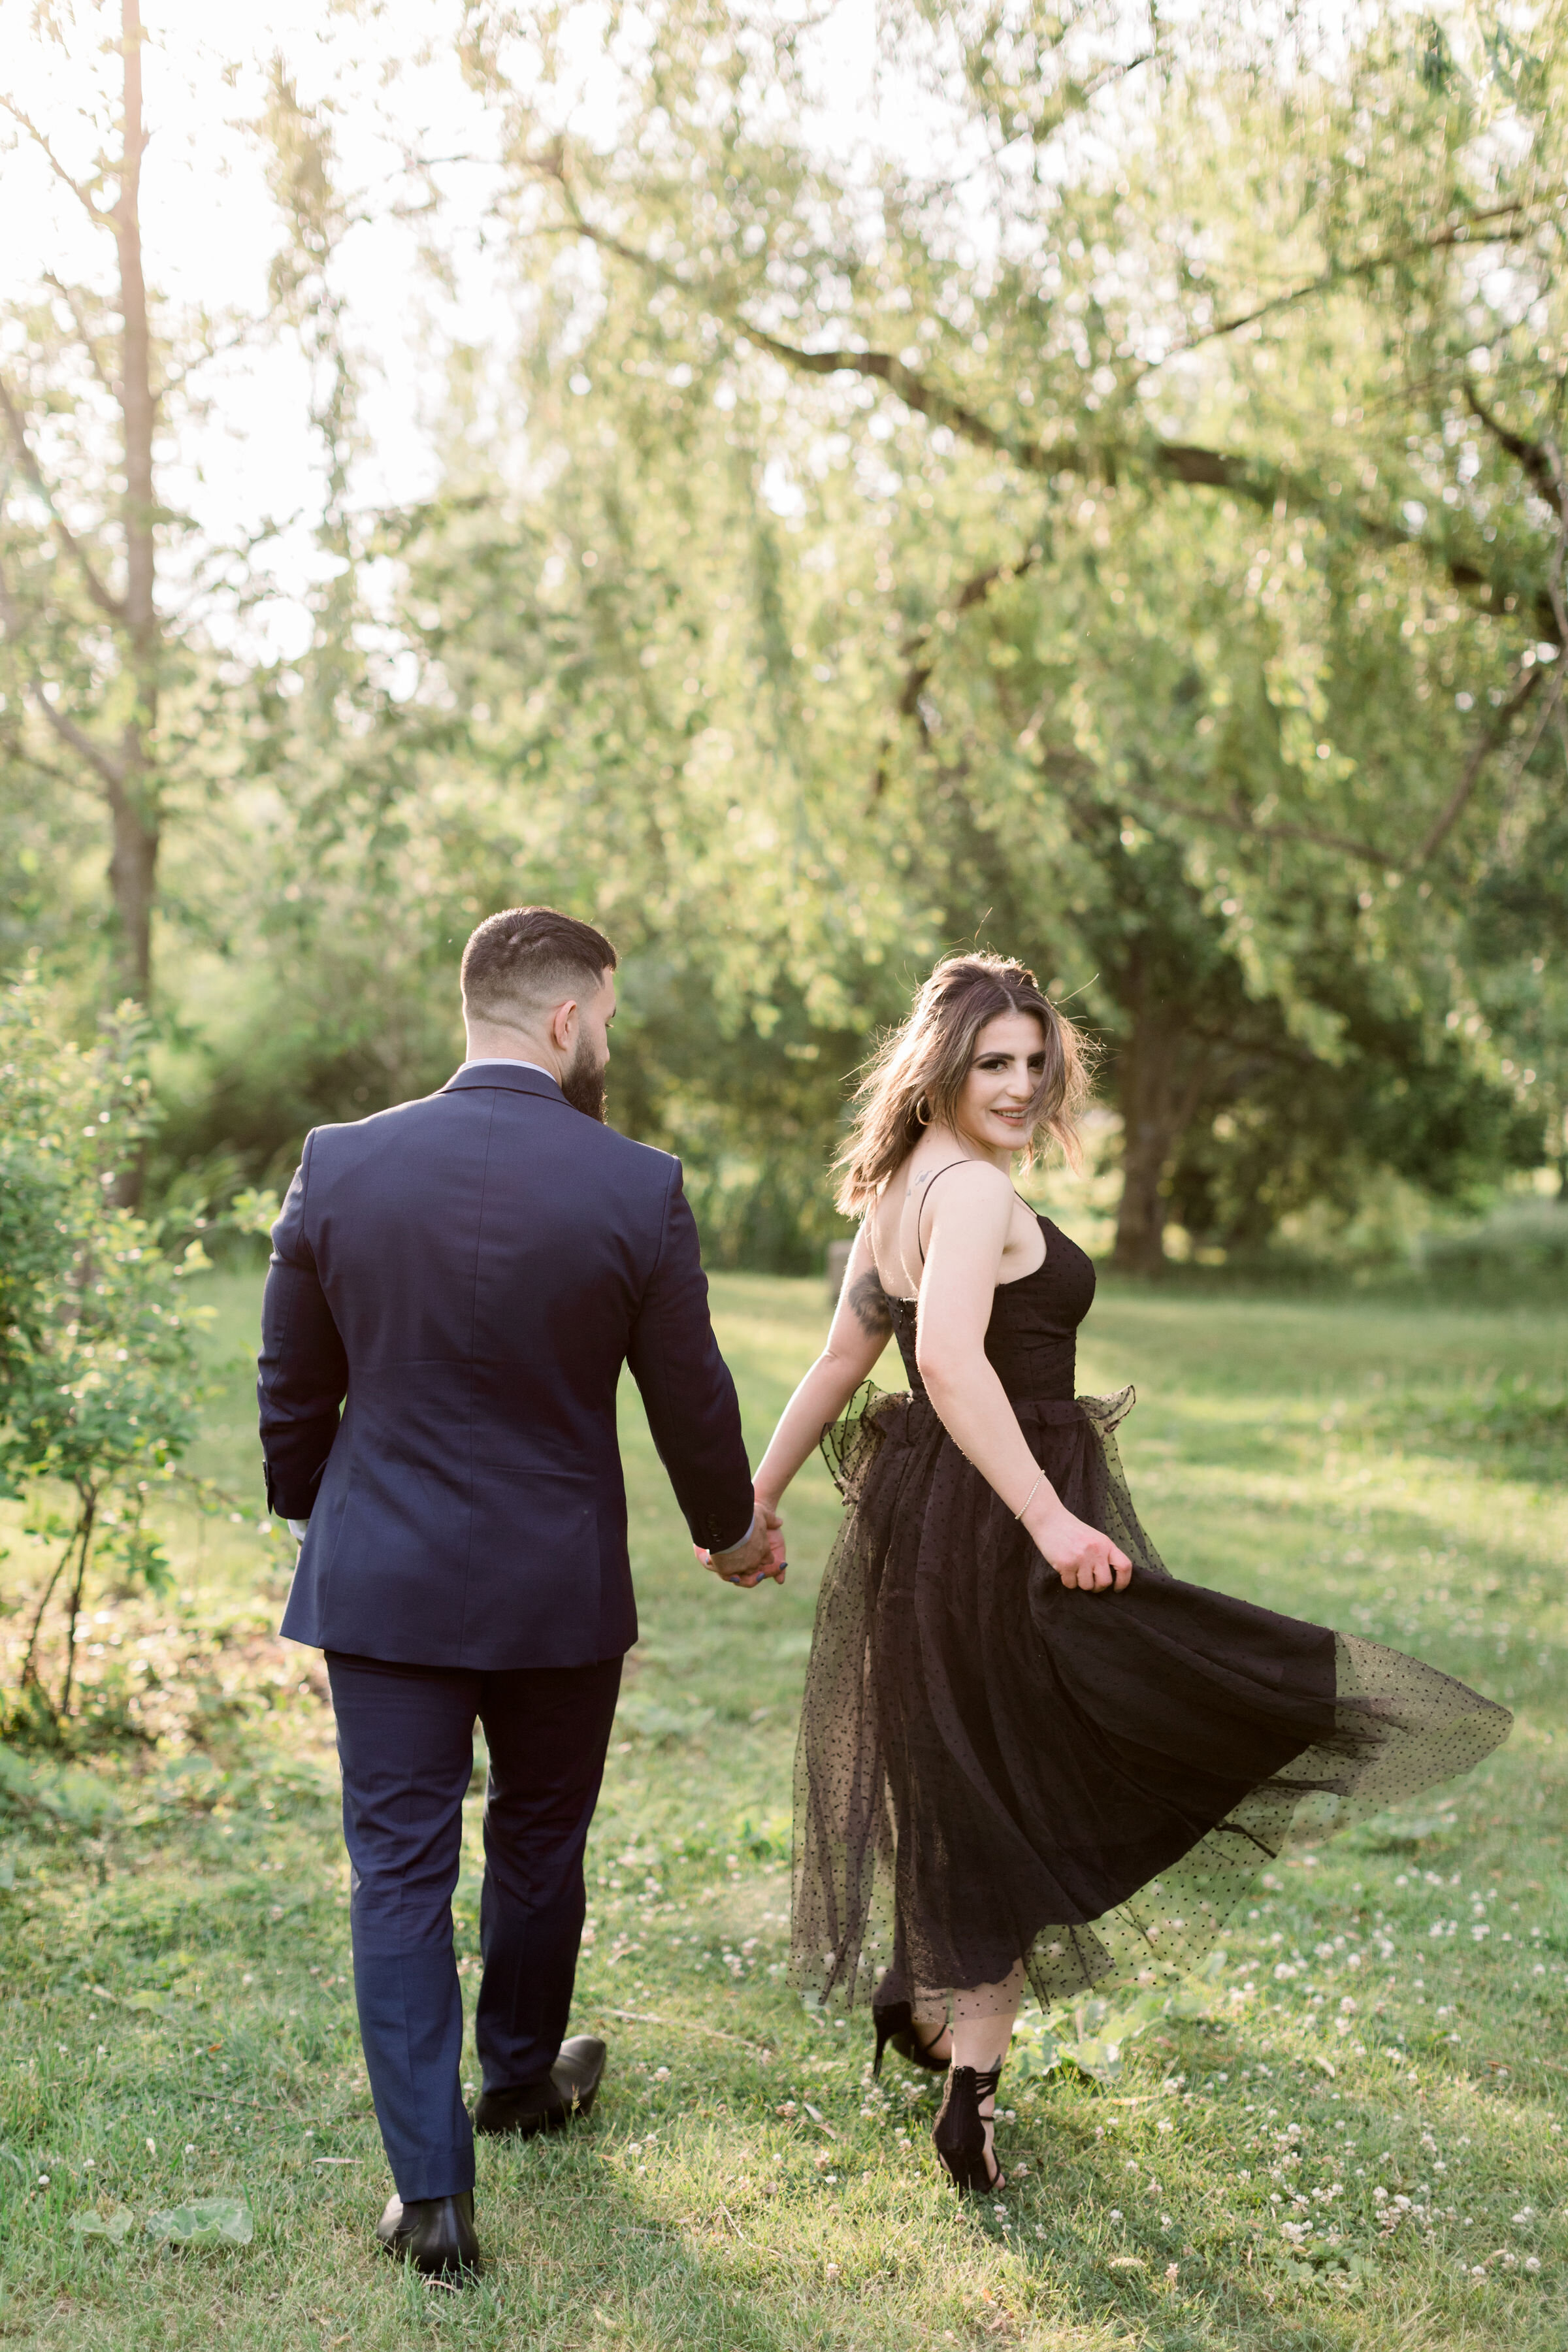  While walking through a shaded grassy park, Ottawa, Ontario photographer, Chelsea Mason Photography captures this formally dressed engaged couple holding hands and looking over their shoulder. formal engagement photo outfits women black tea length d